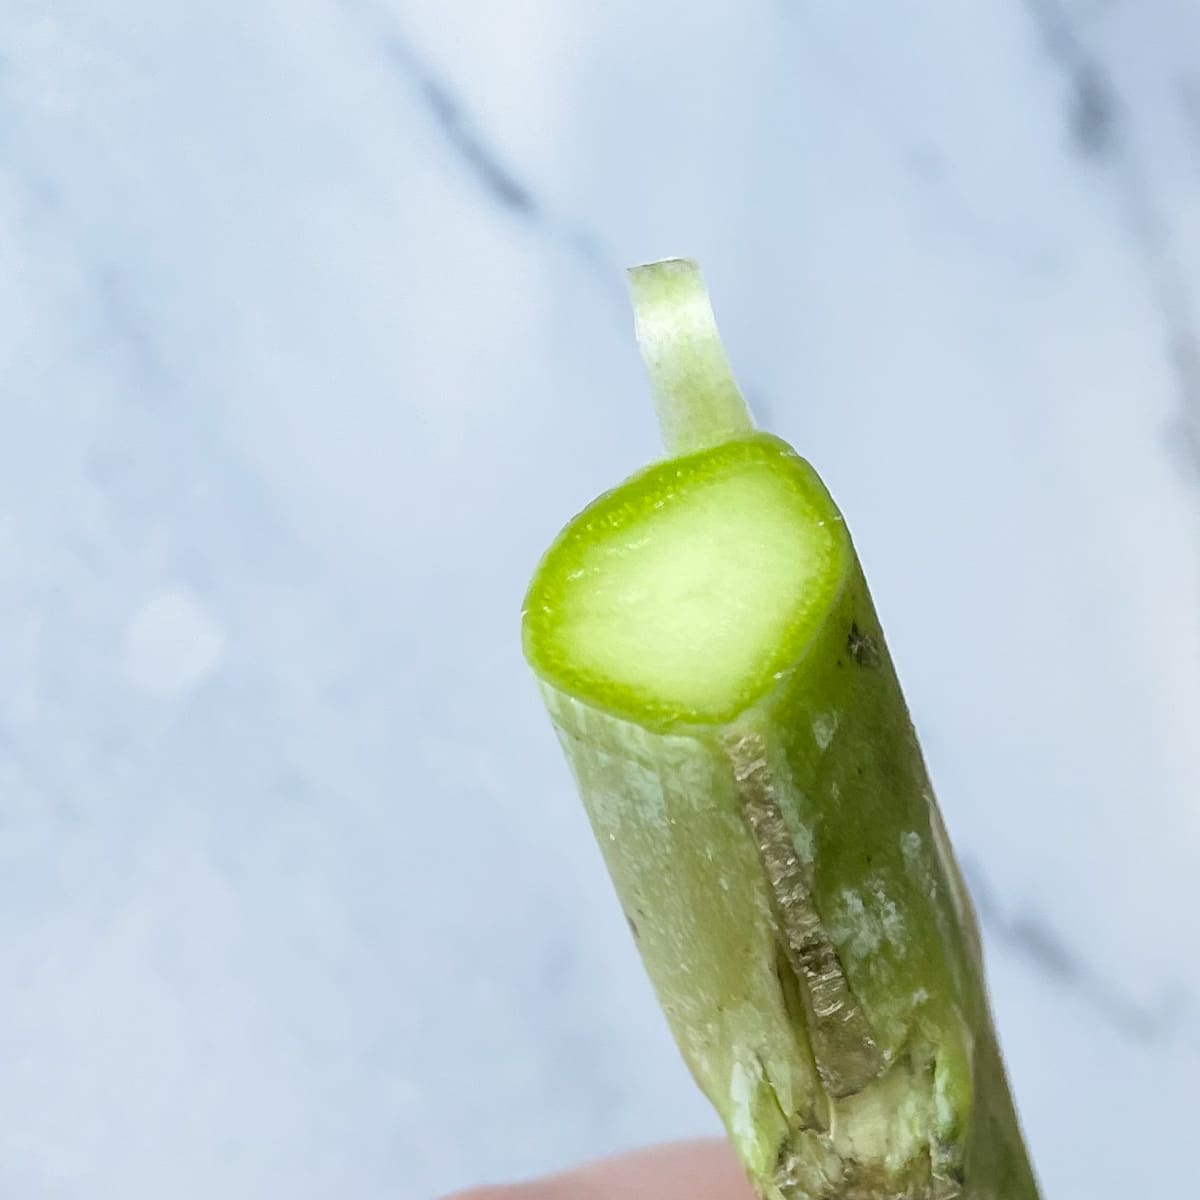 The cut end of a stem of baby broccoli is shown in the foreground over a white marble counter.